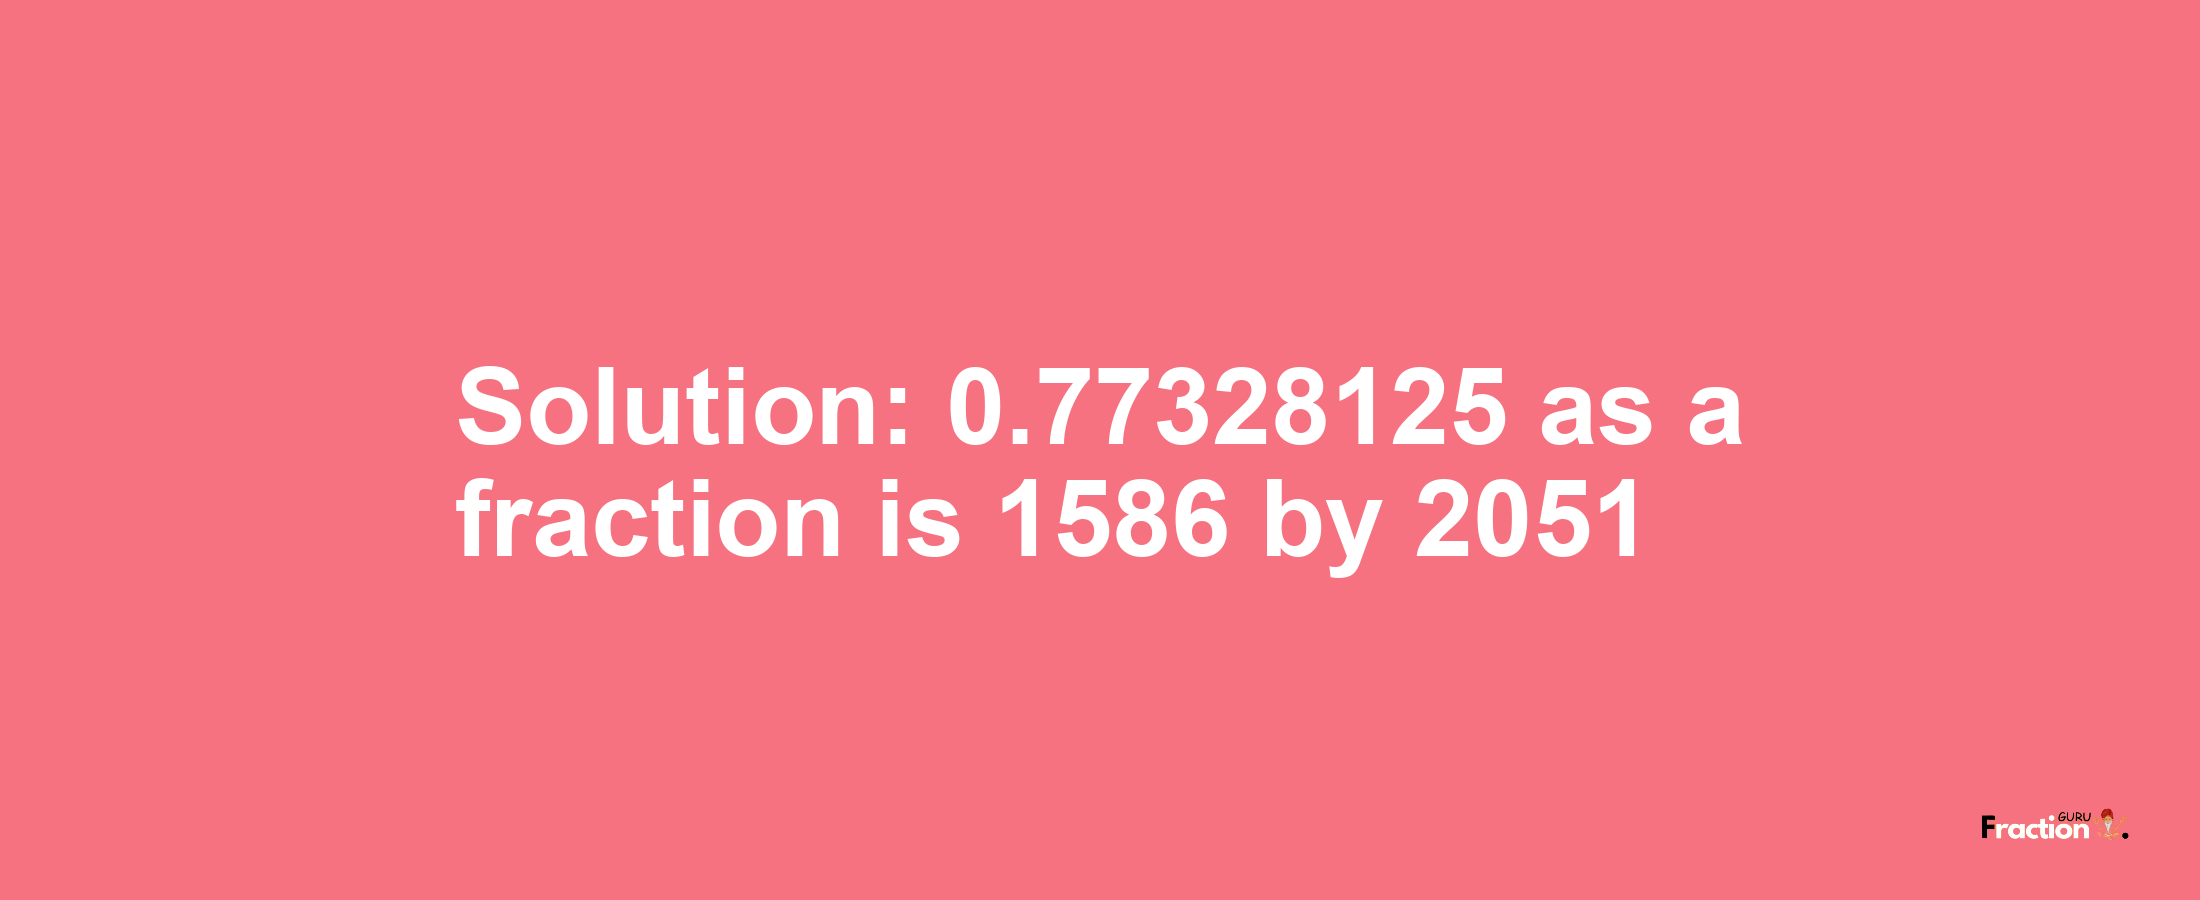 Solution:0.77328125 as a fraction is 1586/2051